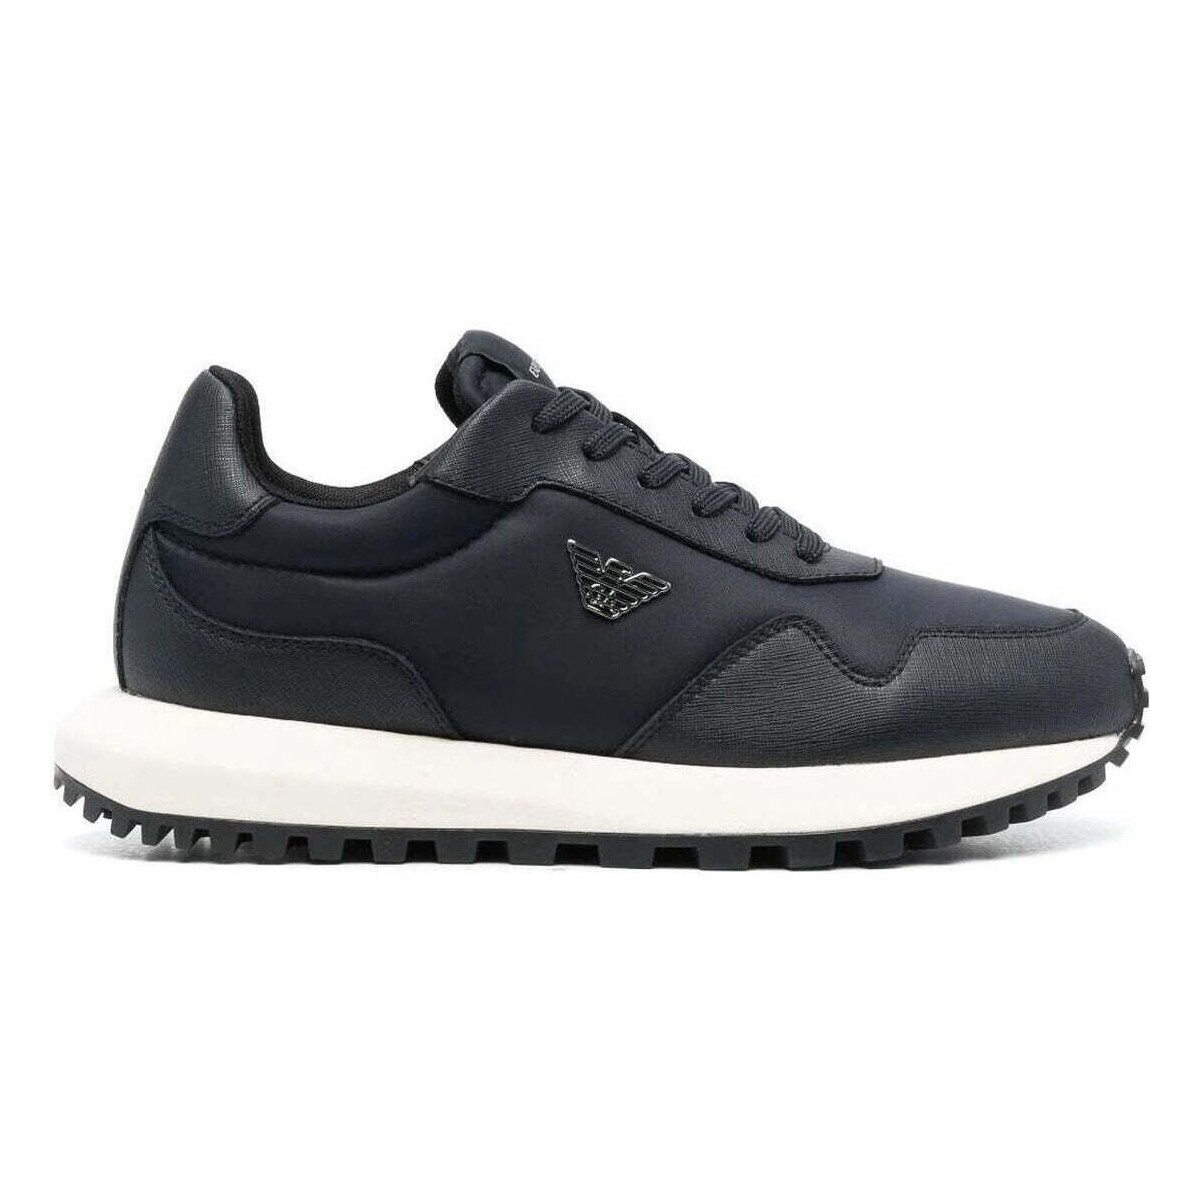 Chaussures Homme Baskets basses Emporio Armani navy casual closed sneaker Bleu